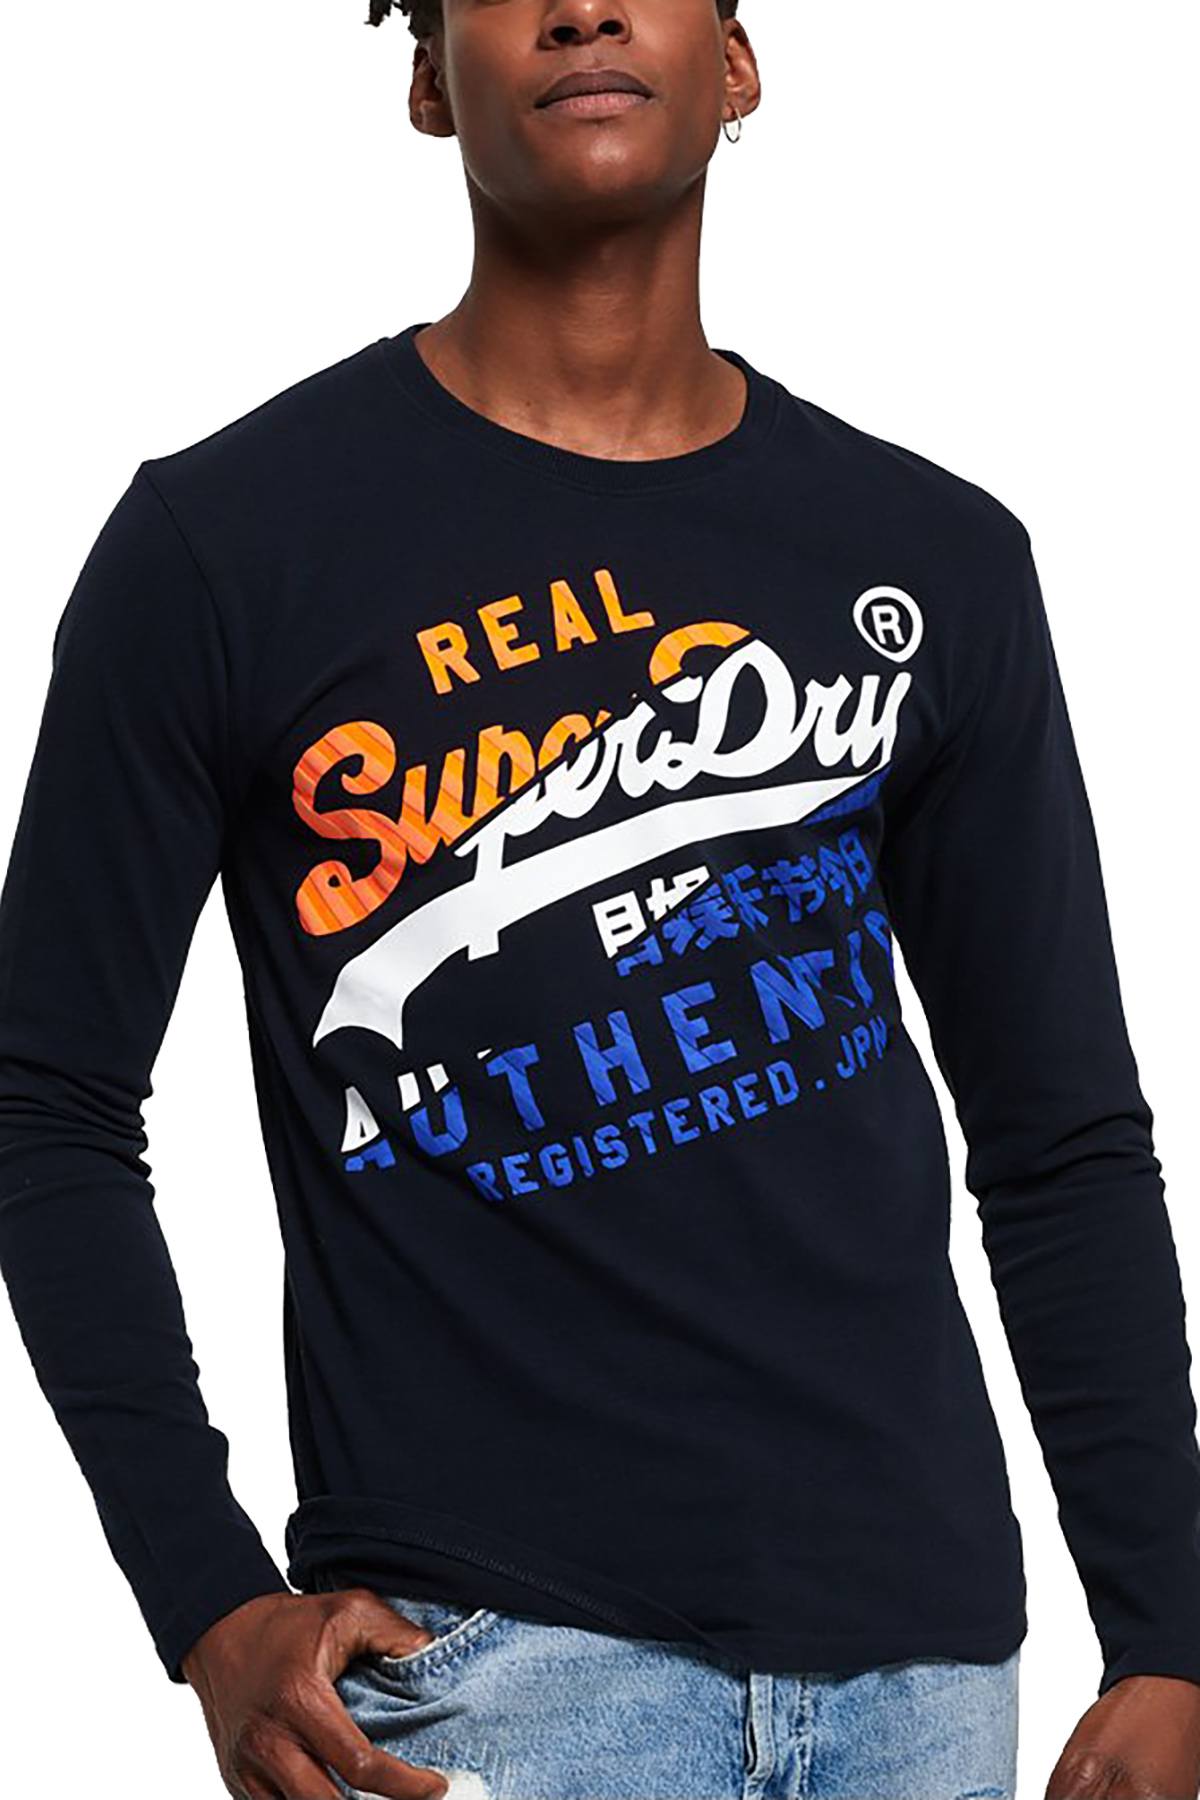 SuperDry Eclipse-Navy Vintage Authentic XL – CheapUndies T-Shirt Long-Sleeve